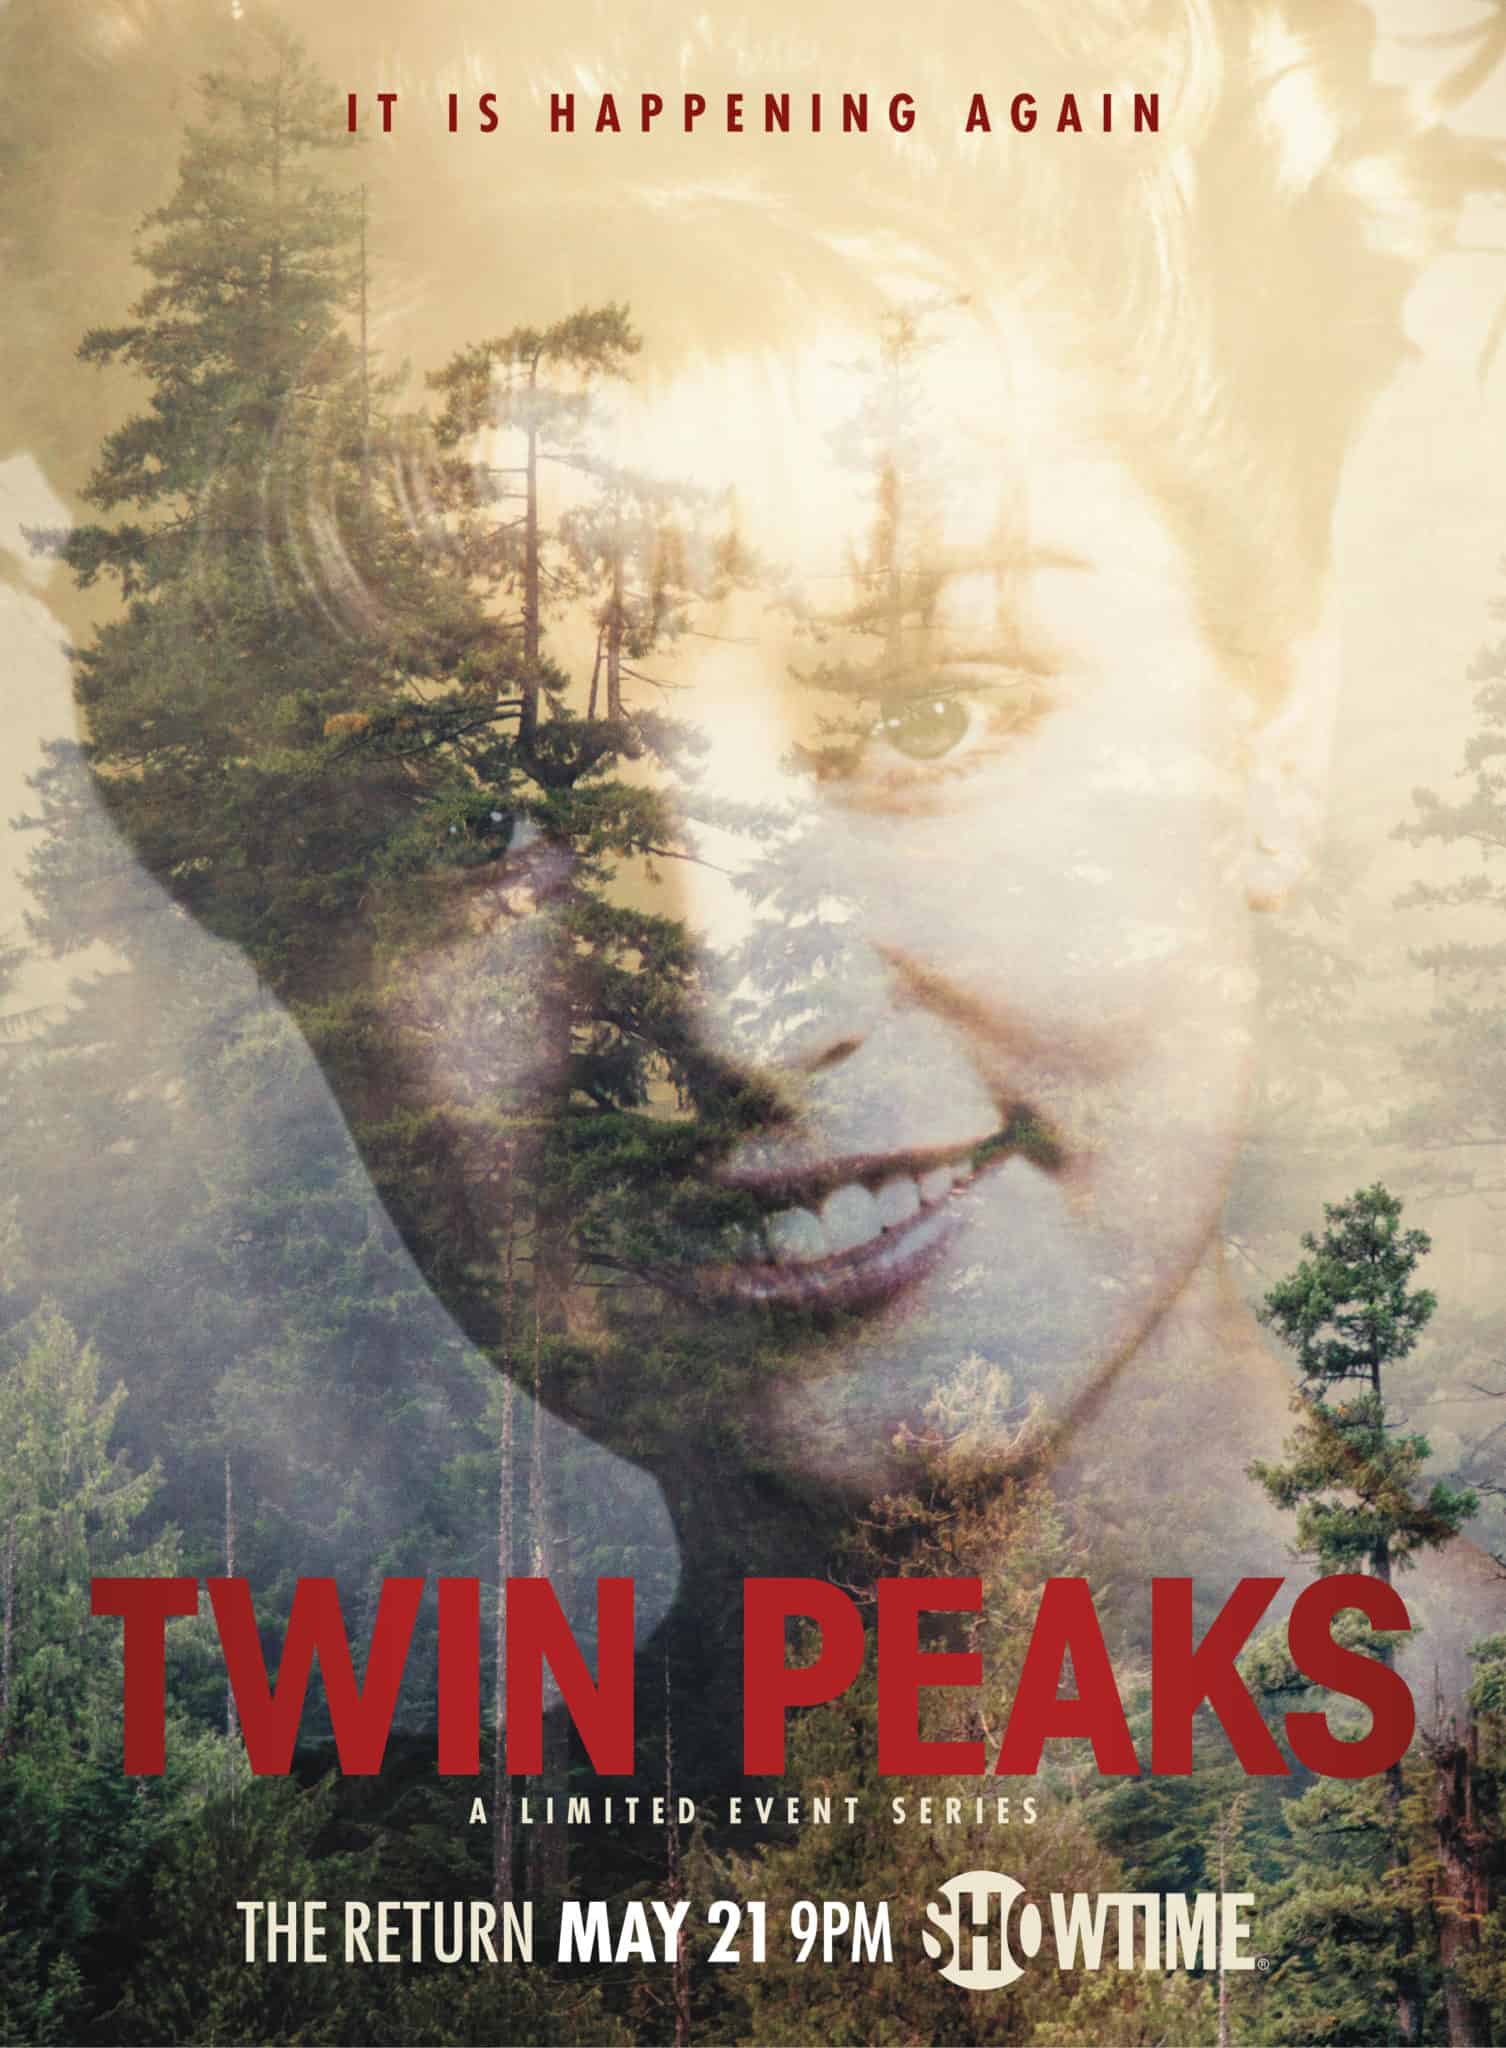 Official Twin Peaks “It Is Happening Again” Posters Revealed On